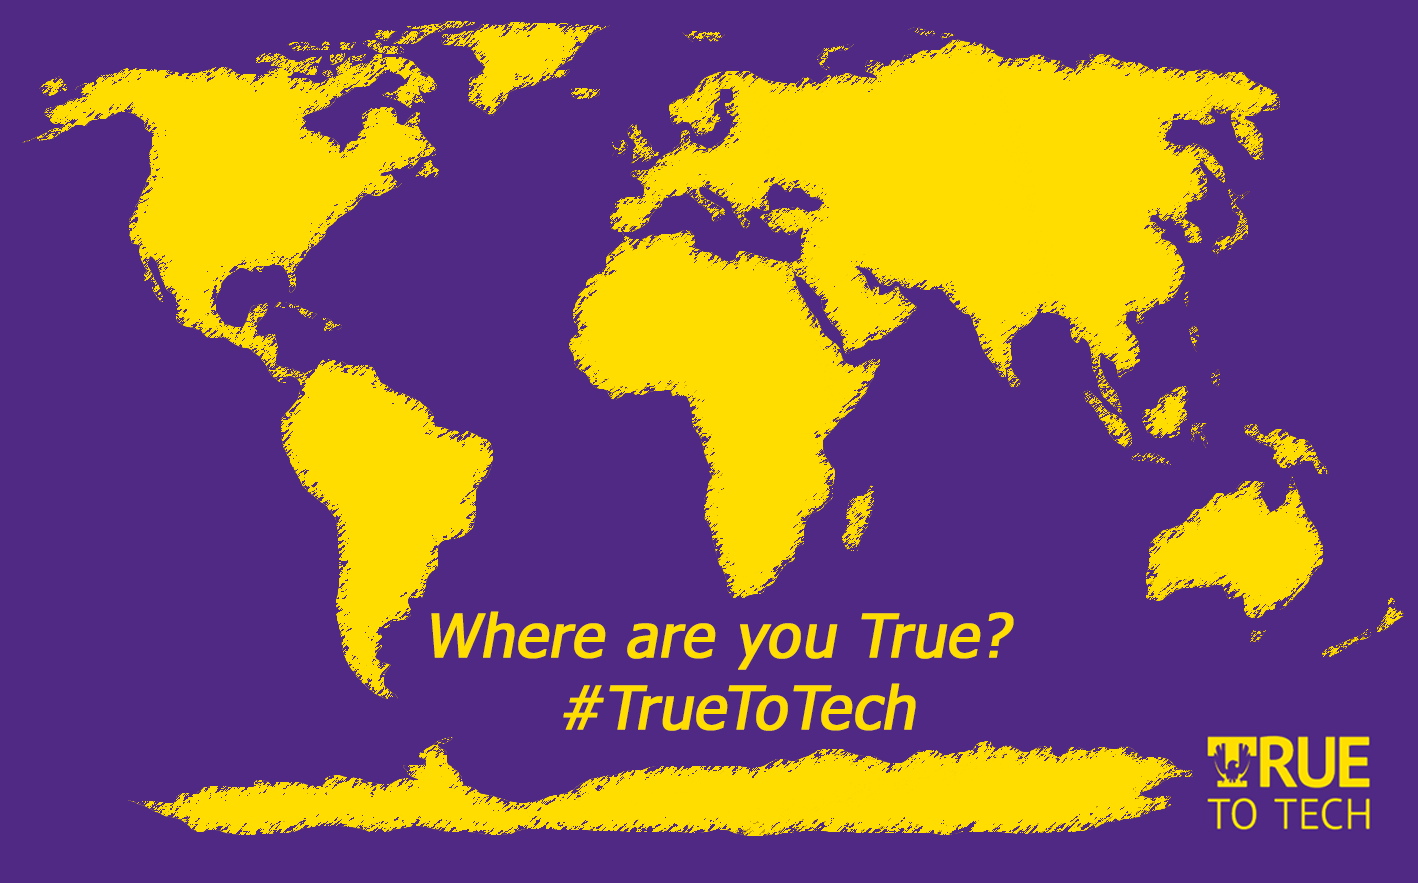 A graphic with a world map in gold on a purple field that reads "Where are you True, #TrueToTech"